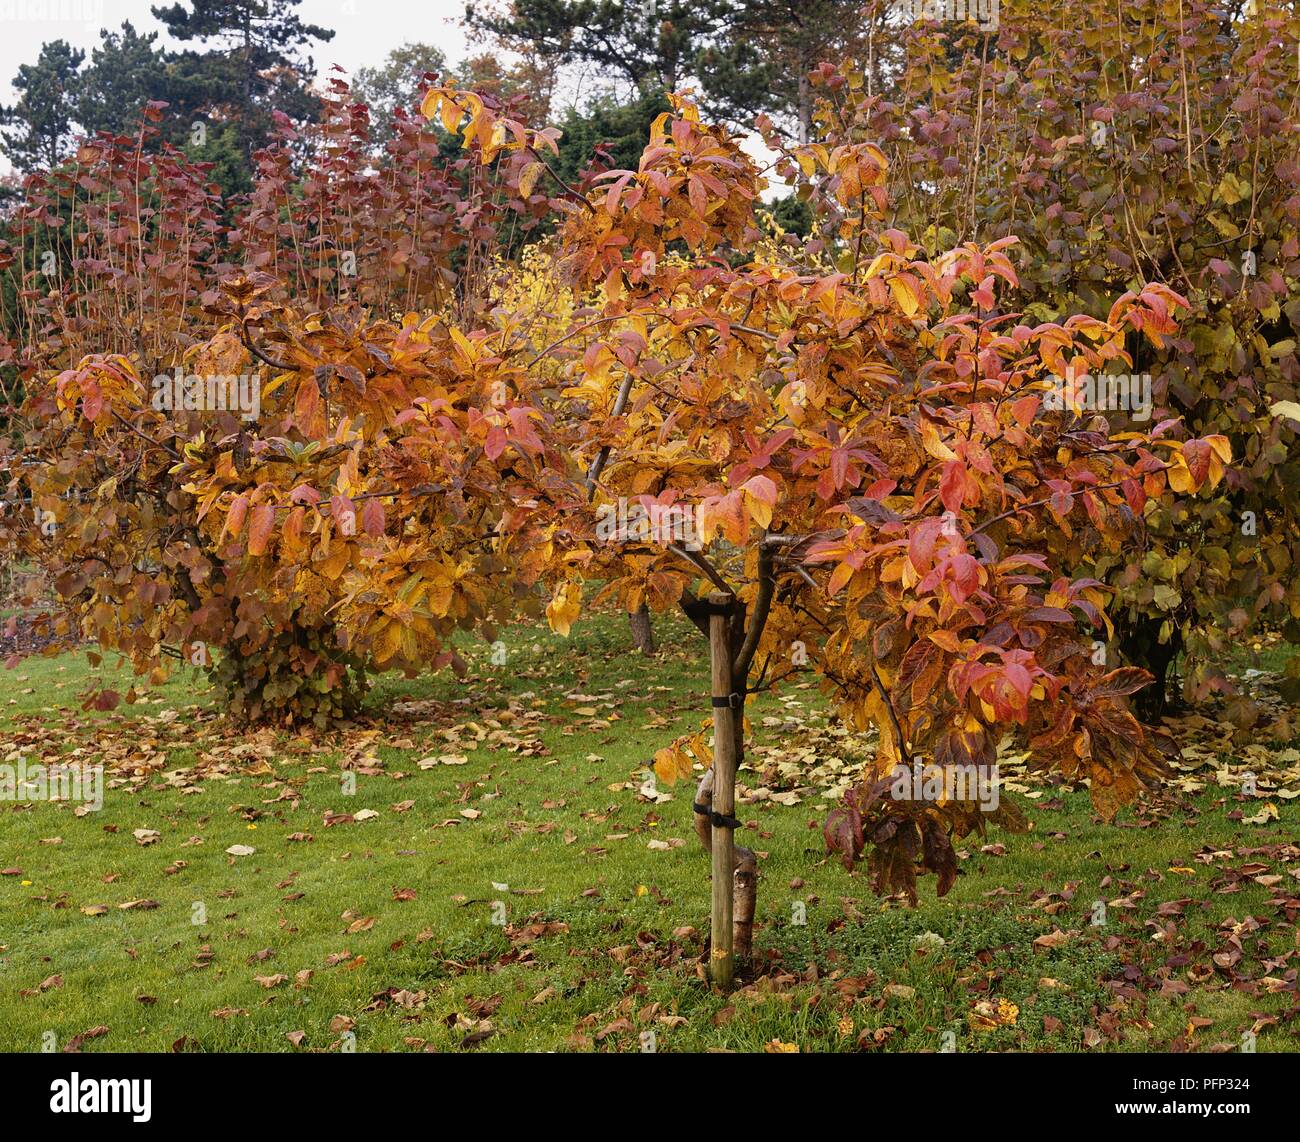 Mespilus germanica (Common medlar) tree showing red and yellow autumn foliage Stock Photo